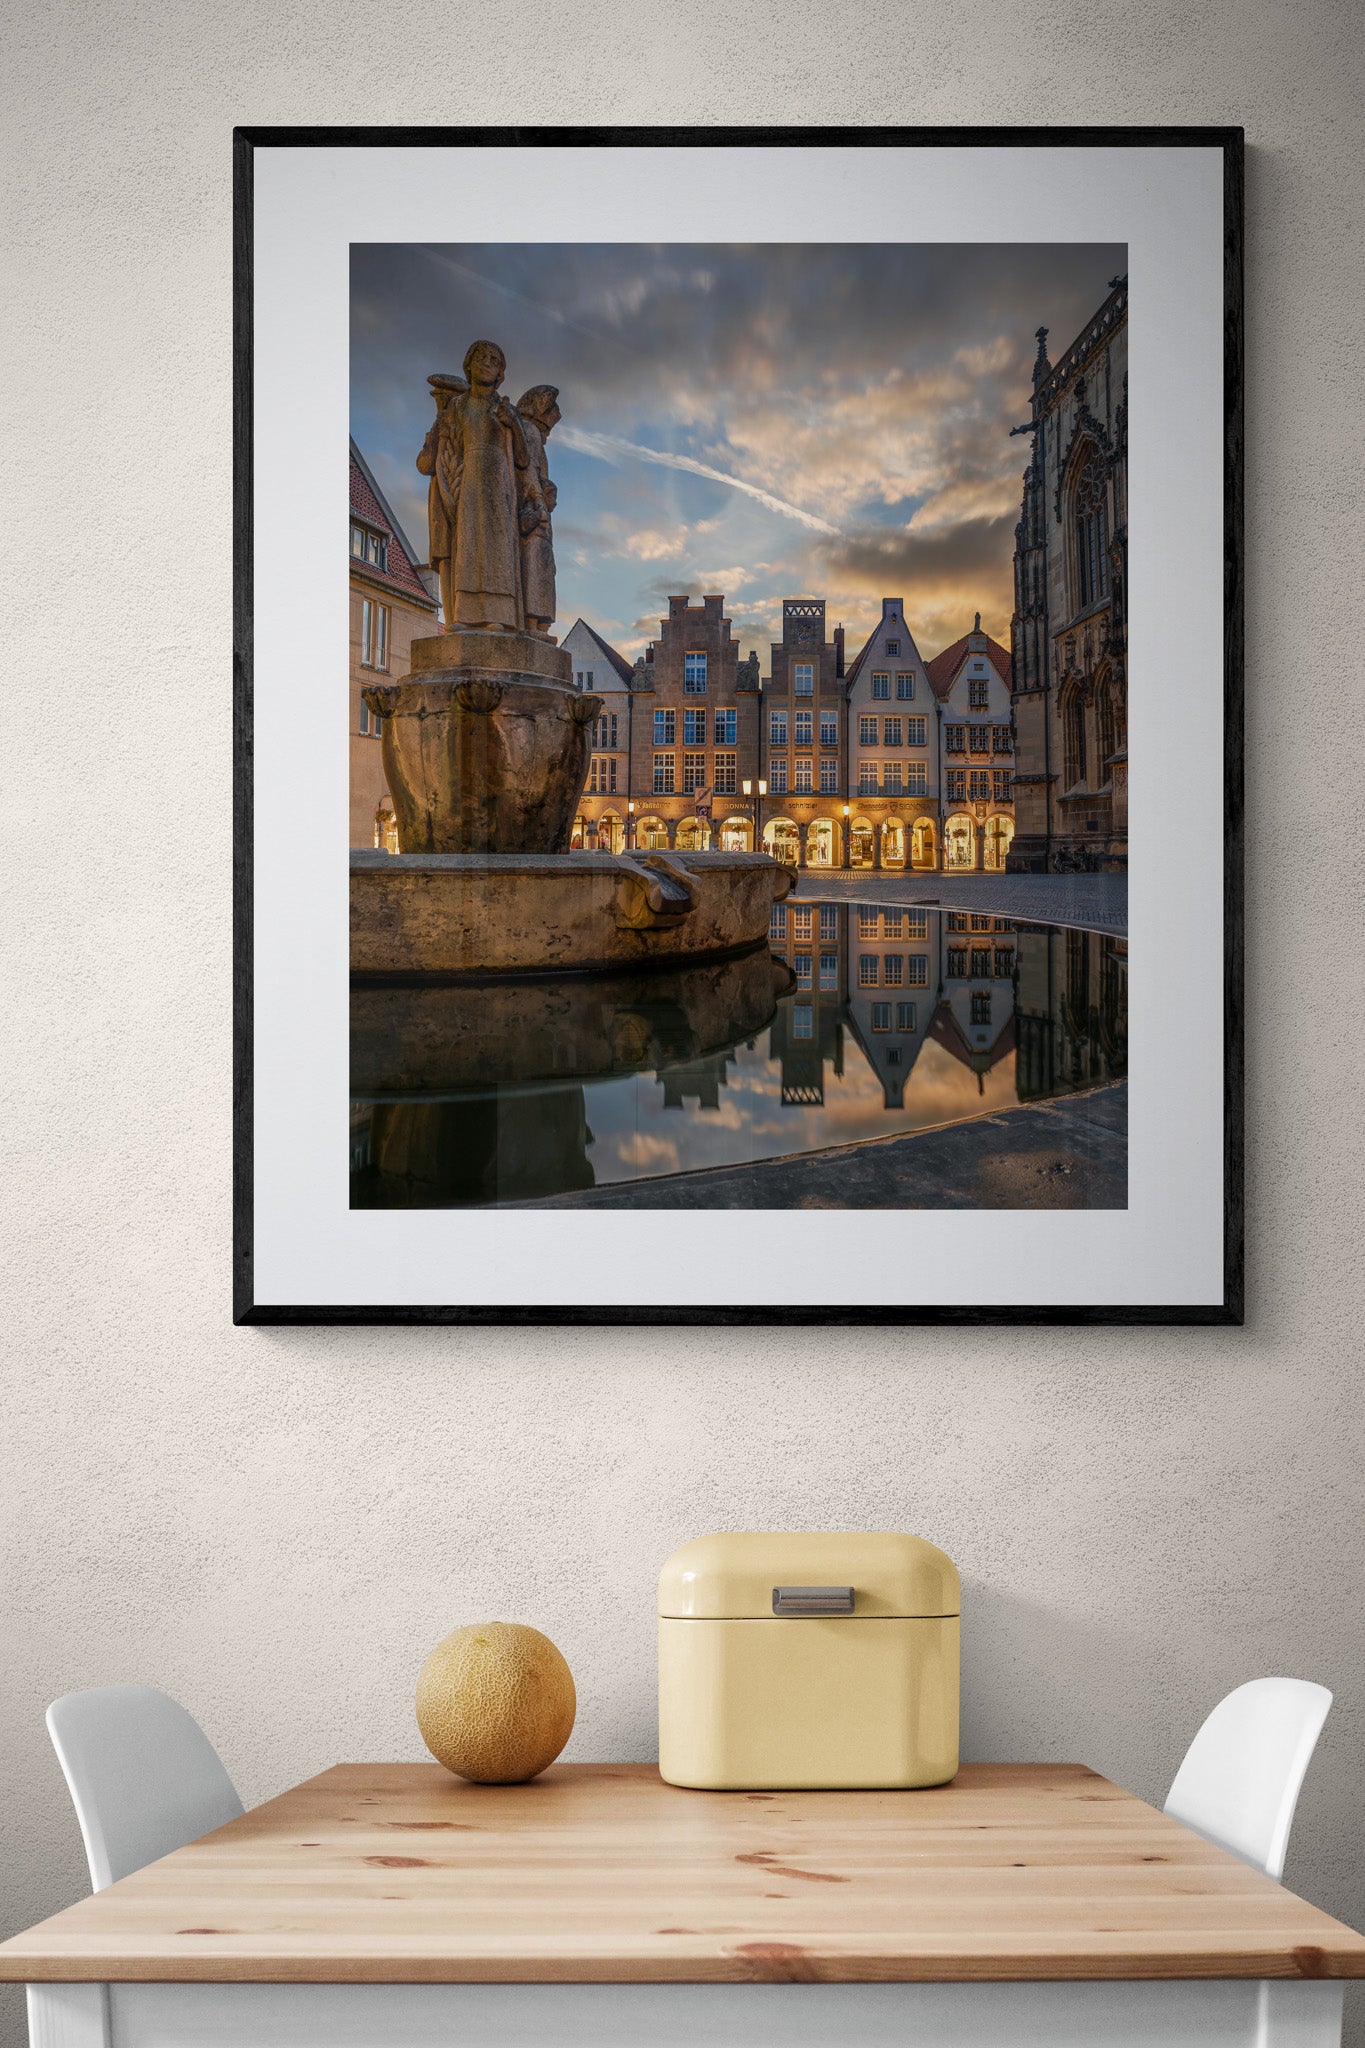 Image Title: Well, it's Münster!  Photographer: Marcus Danz Location: Münster, Germany Image description: Münster's ”Prinzipalmarkt“ is reflected in the water of a fountain during sunset. High quality Fine Art print up to 36 inch / around 90 centimeters on Hahnemühle paper available. Large variant over kitchen table.